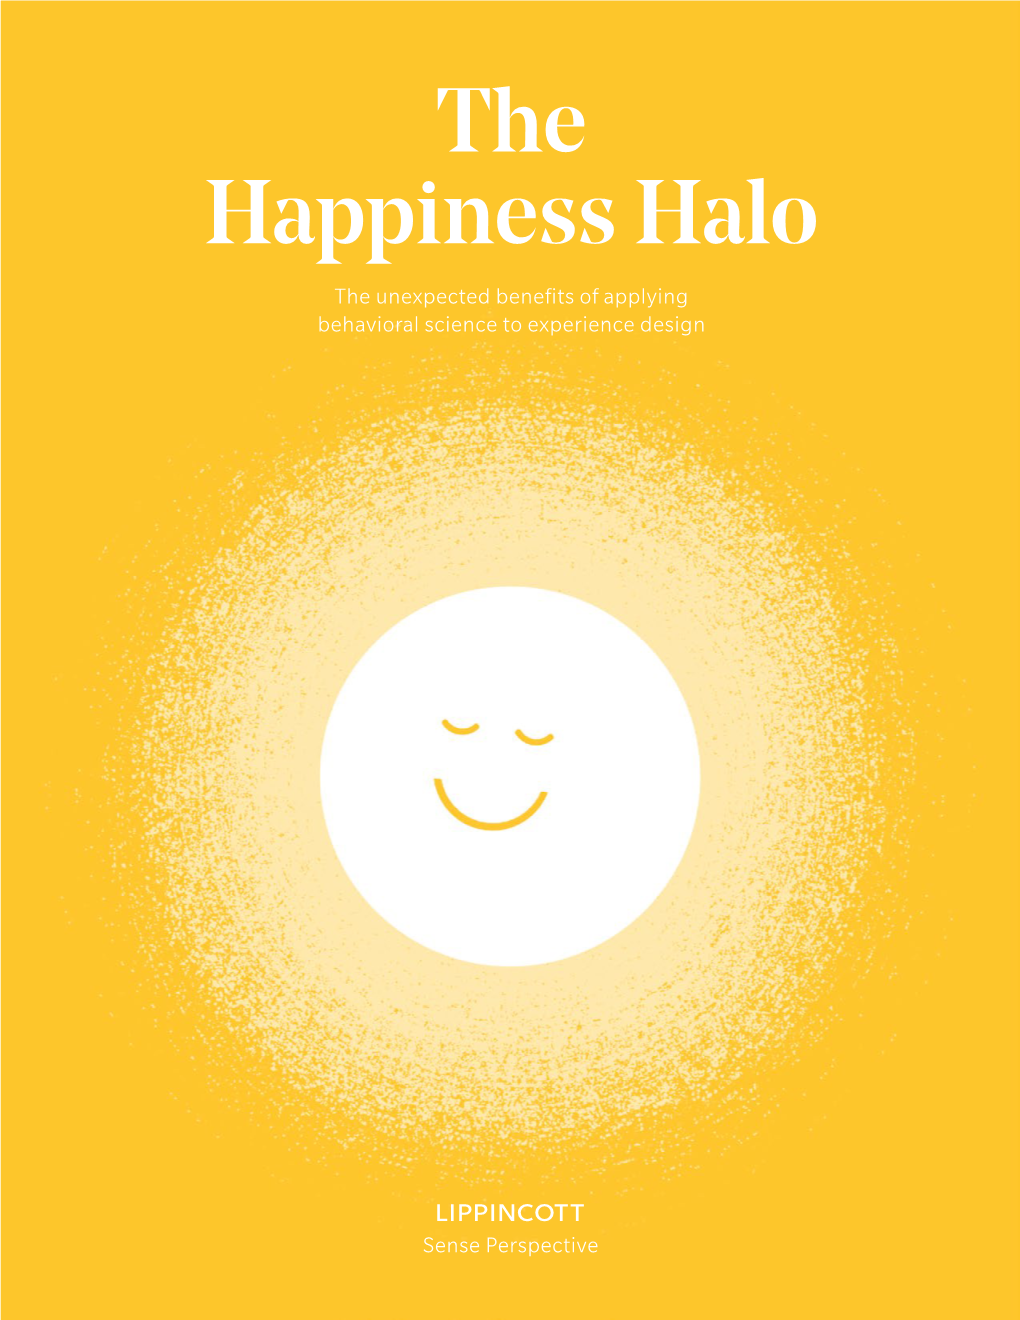 The Happiness Halo the Unexpected Benefits of Applying Behavioral Science to Experience Design